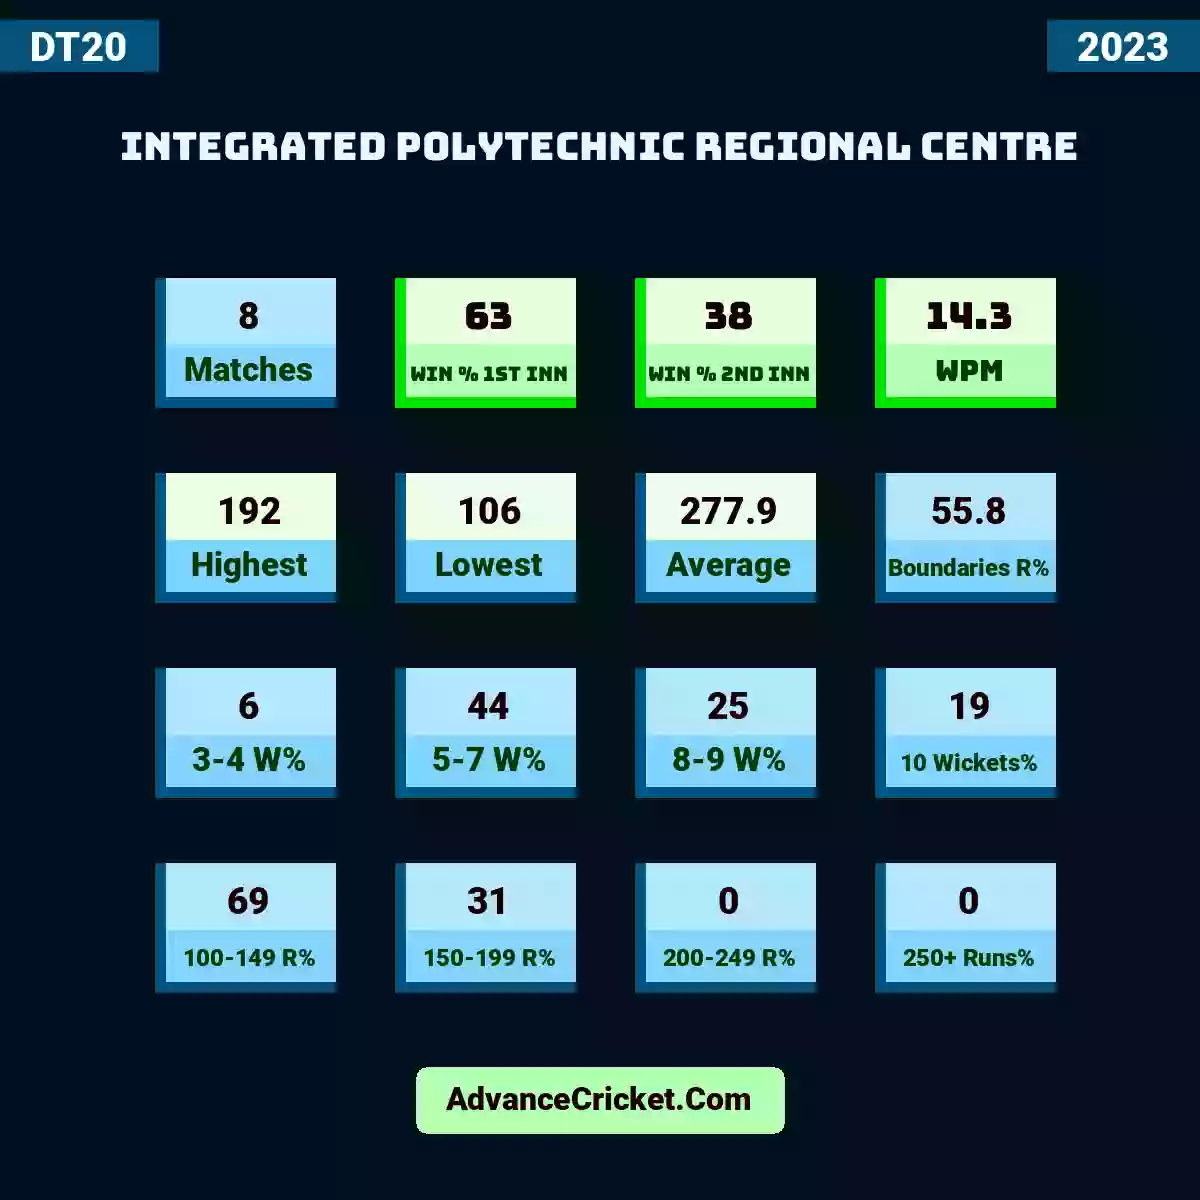 Image showing Integrated Polytechnic Regional Centre DT20 2023 with Matches: 8, Win % 1st Inn: 63, Win % 2nd Inn: 38, WPM: 14.3, Highest: 192, Lowest: 106, Average: 277.9, Boundaries R%: 55.8, 3-4 W%: 6, 5-7 W%: 44, 8-9 W%: 25, 10 Wickets%: 19, 100-149 R%: 69, 150-199 R%: 31, 200-249 R%: 0, 250+ Run